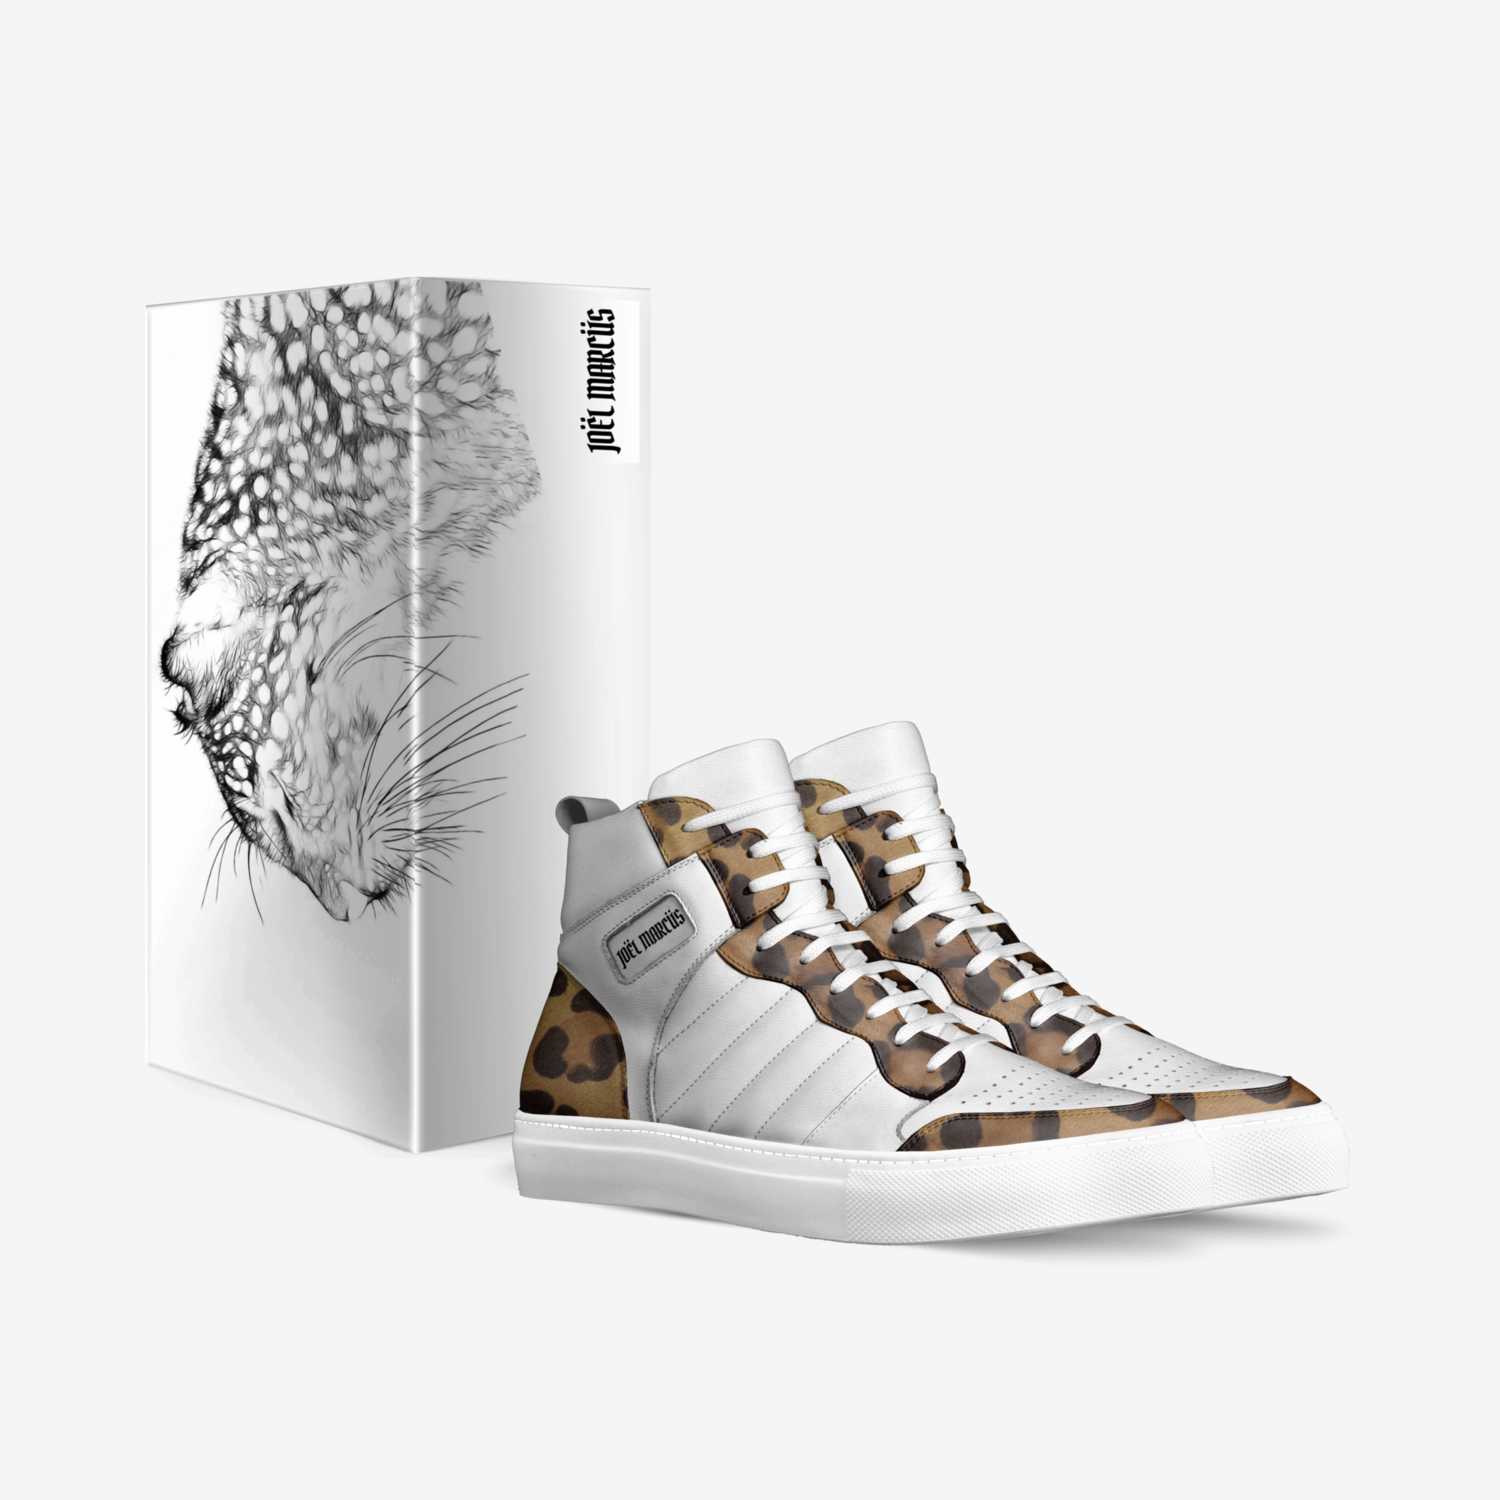 KING OF THE JUNGLE custom made in Italy shoes by JoËl MarcÜs | Box view